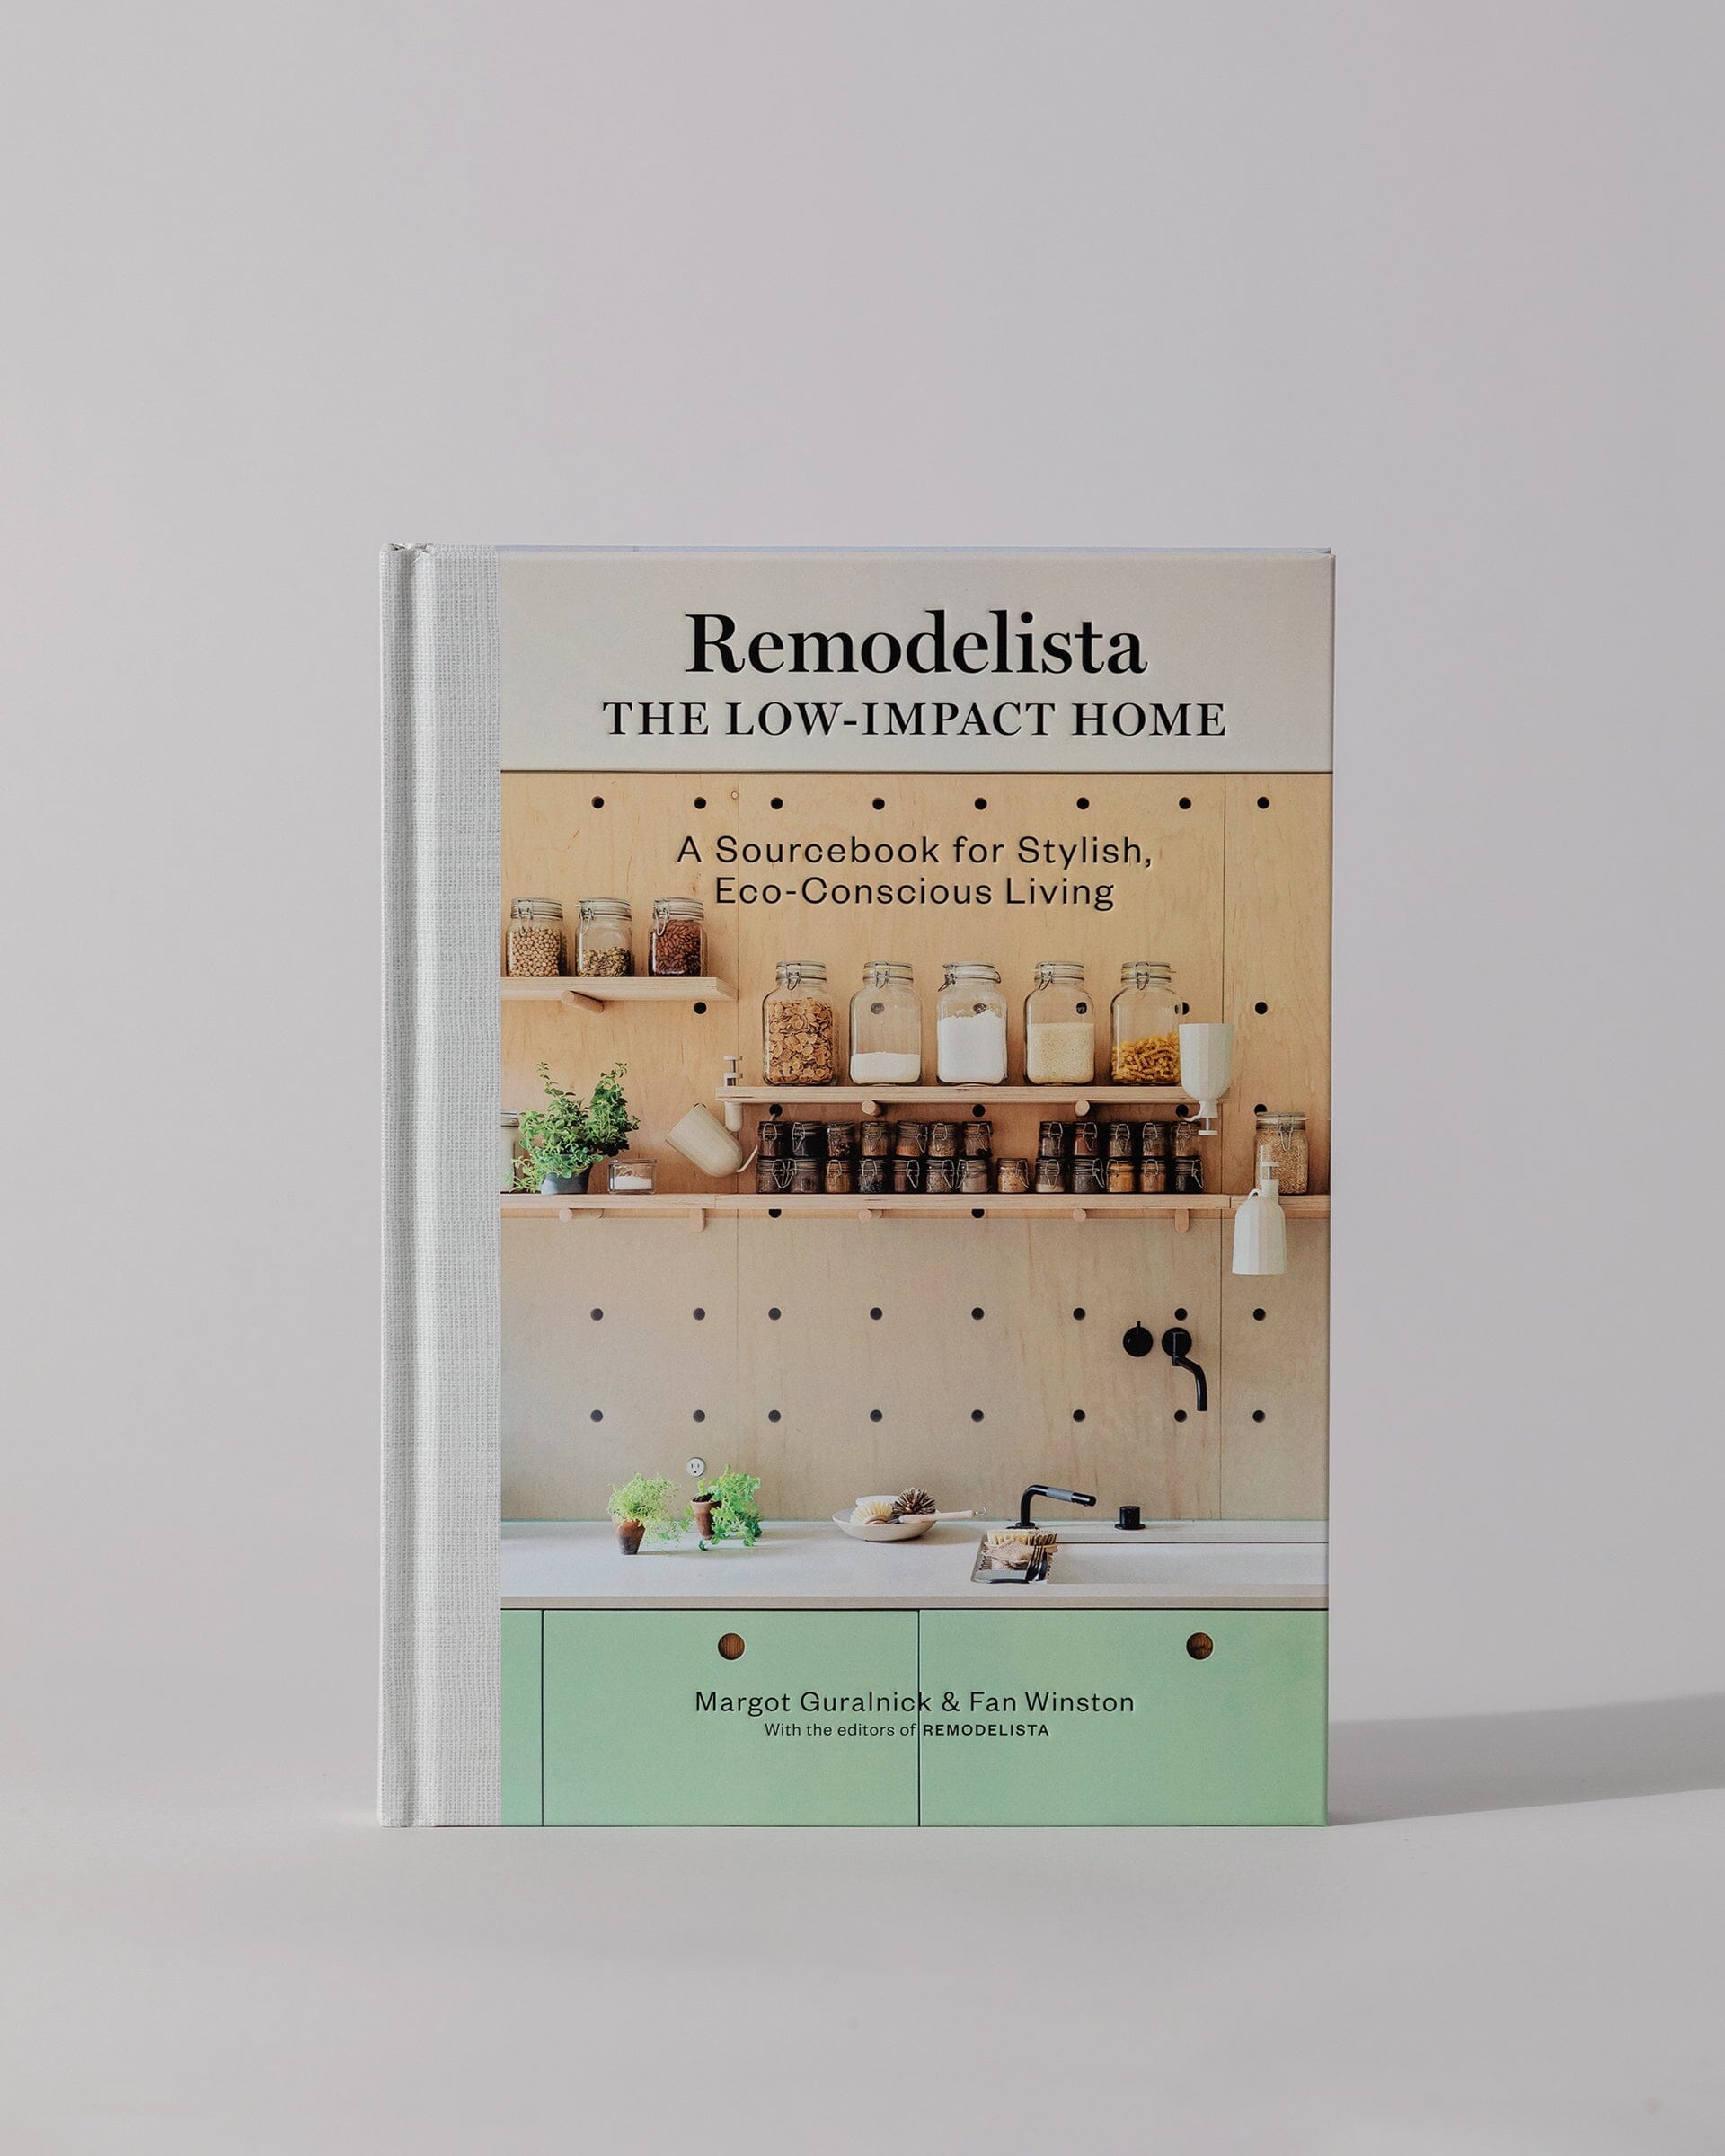 Remodelista: The Low-Impact Home